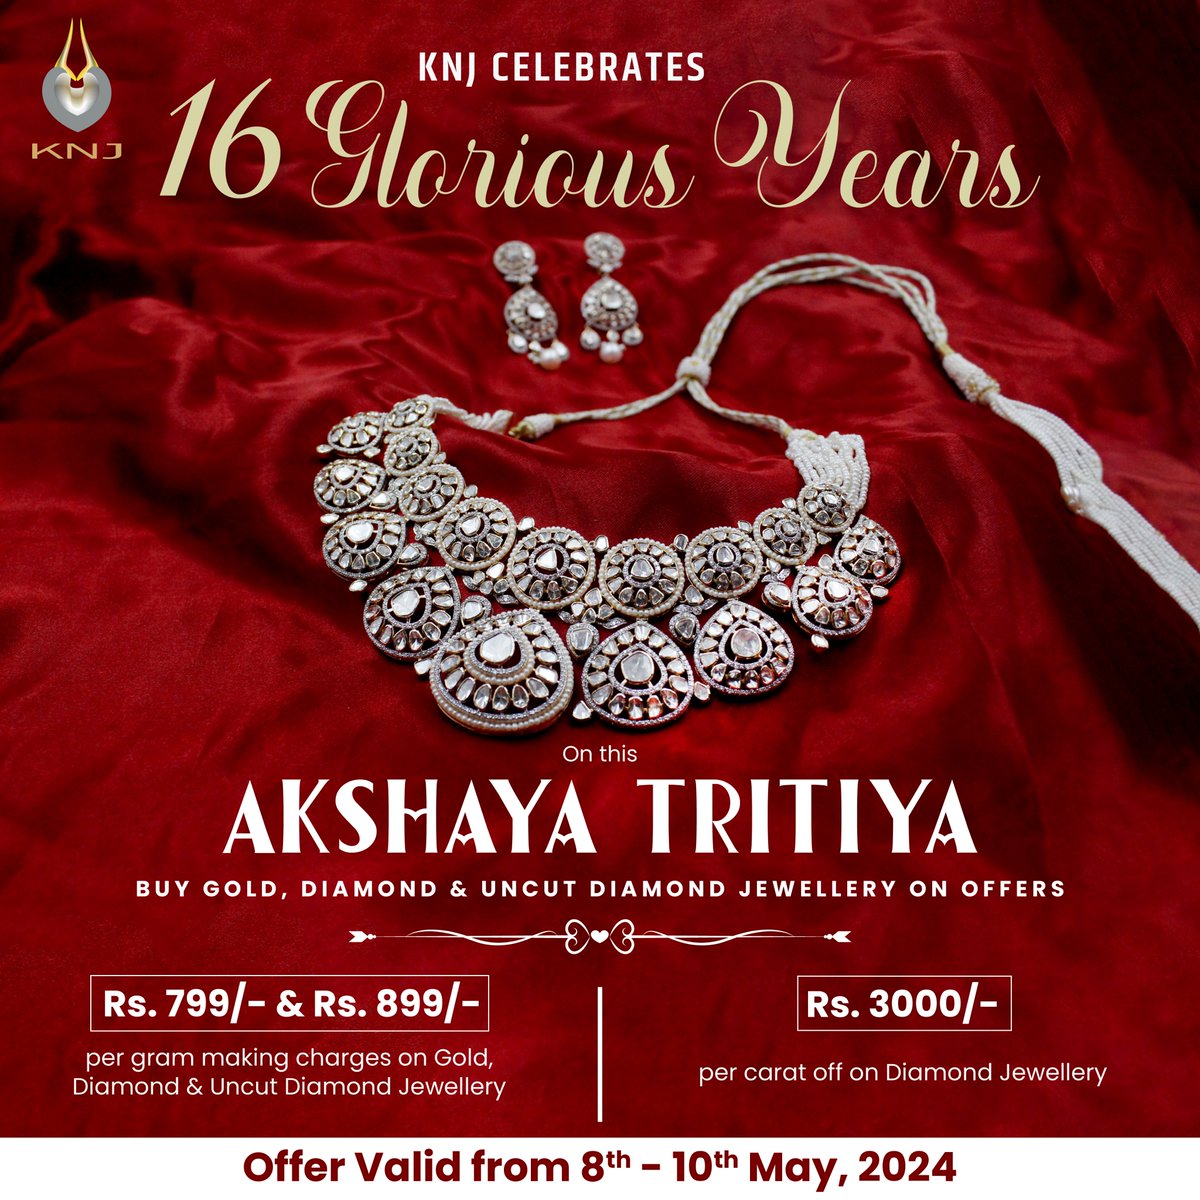 Don't miss out on KNJ's Anniversary & Akshaya Tritiya Offers! Visit now!
.
.
#glorious16years #Jewellery #jewellerycollections #goldjewellry #jewellery #jewellerymaking #jewellerycollection #JewelleryOffer #jewelleryoffersale #jewelleryofferforfestival #AkshayaTritiya